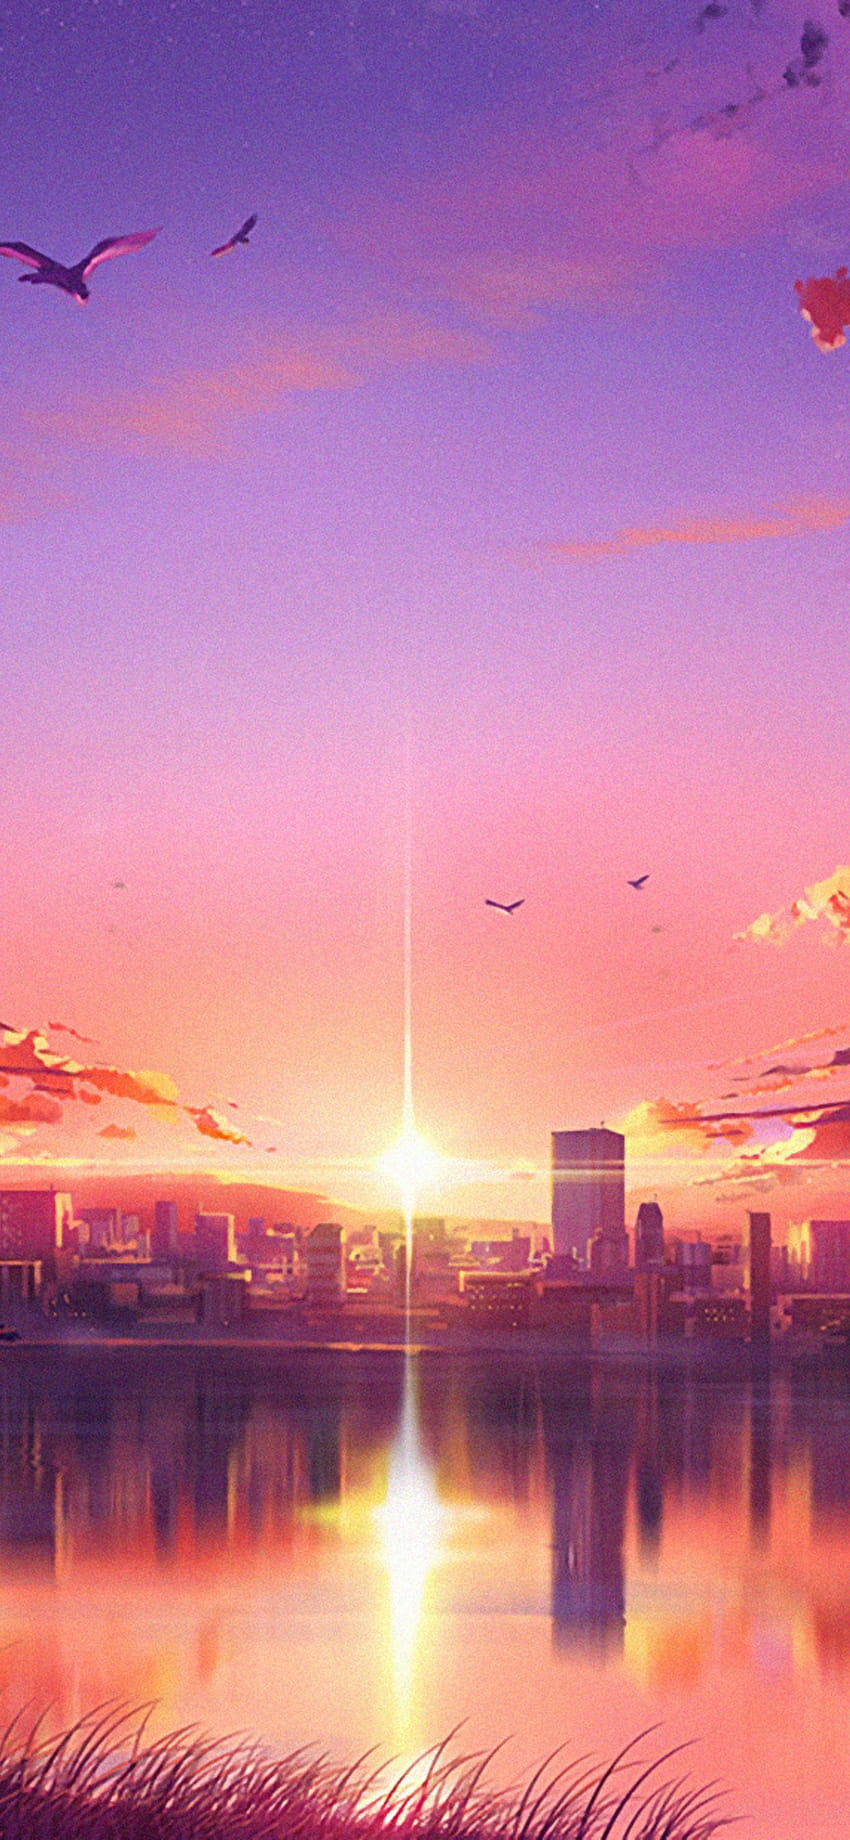 A sunset over the water with birds flying in it - Anime sunset